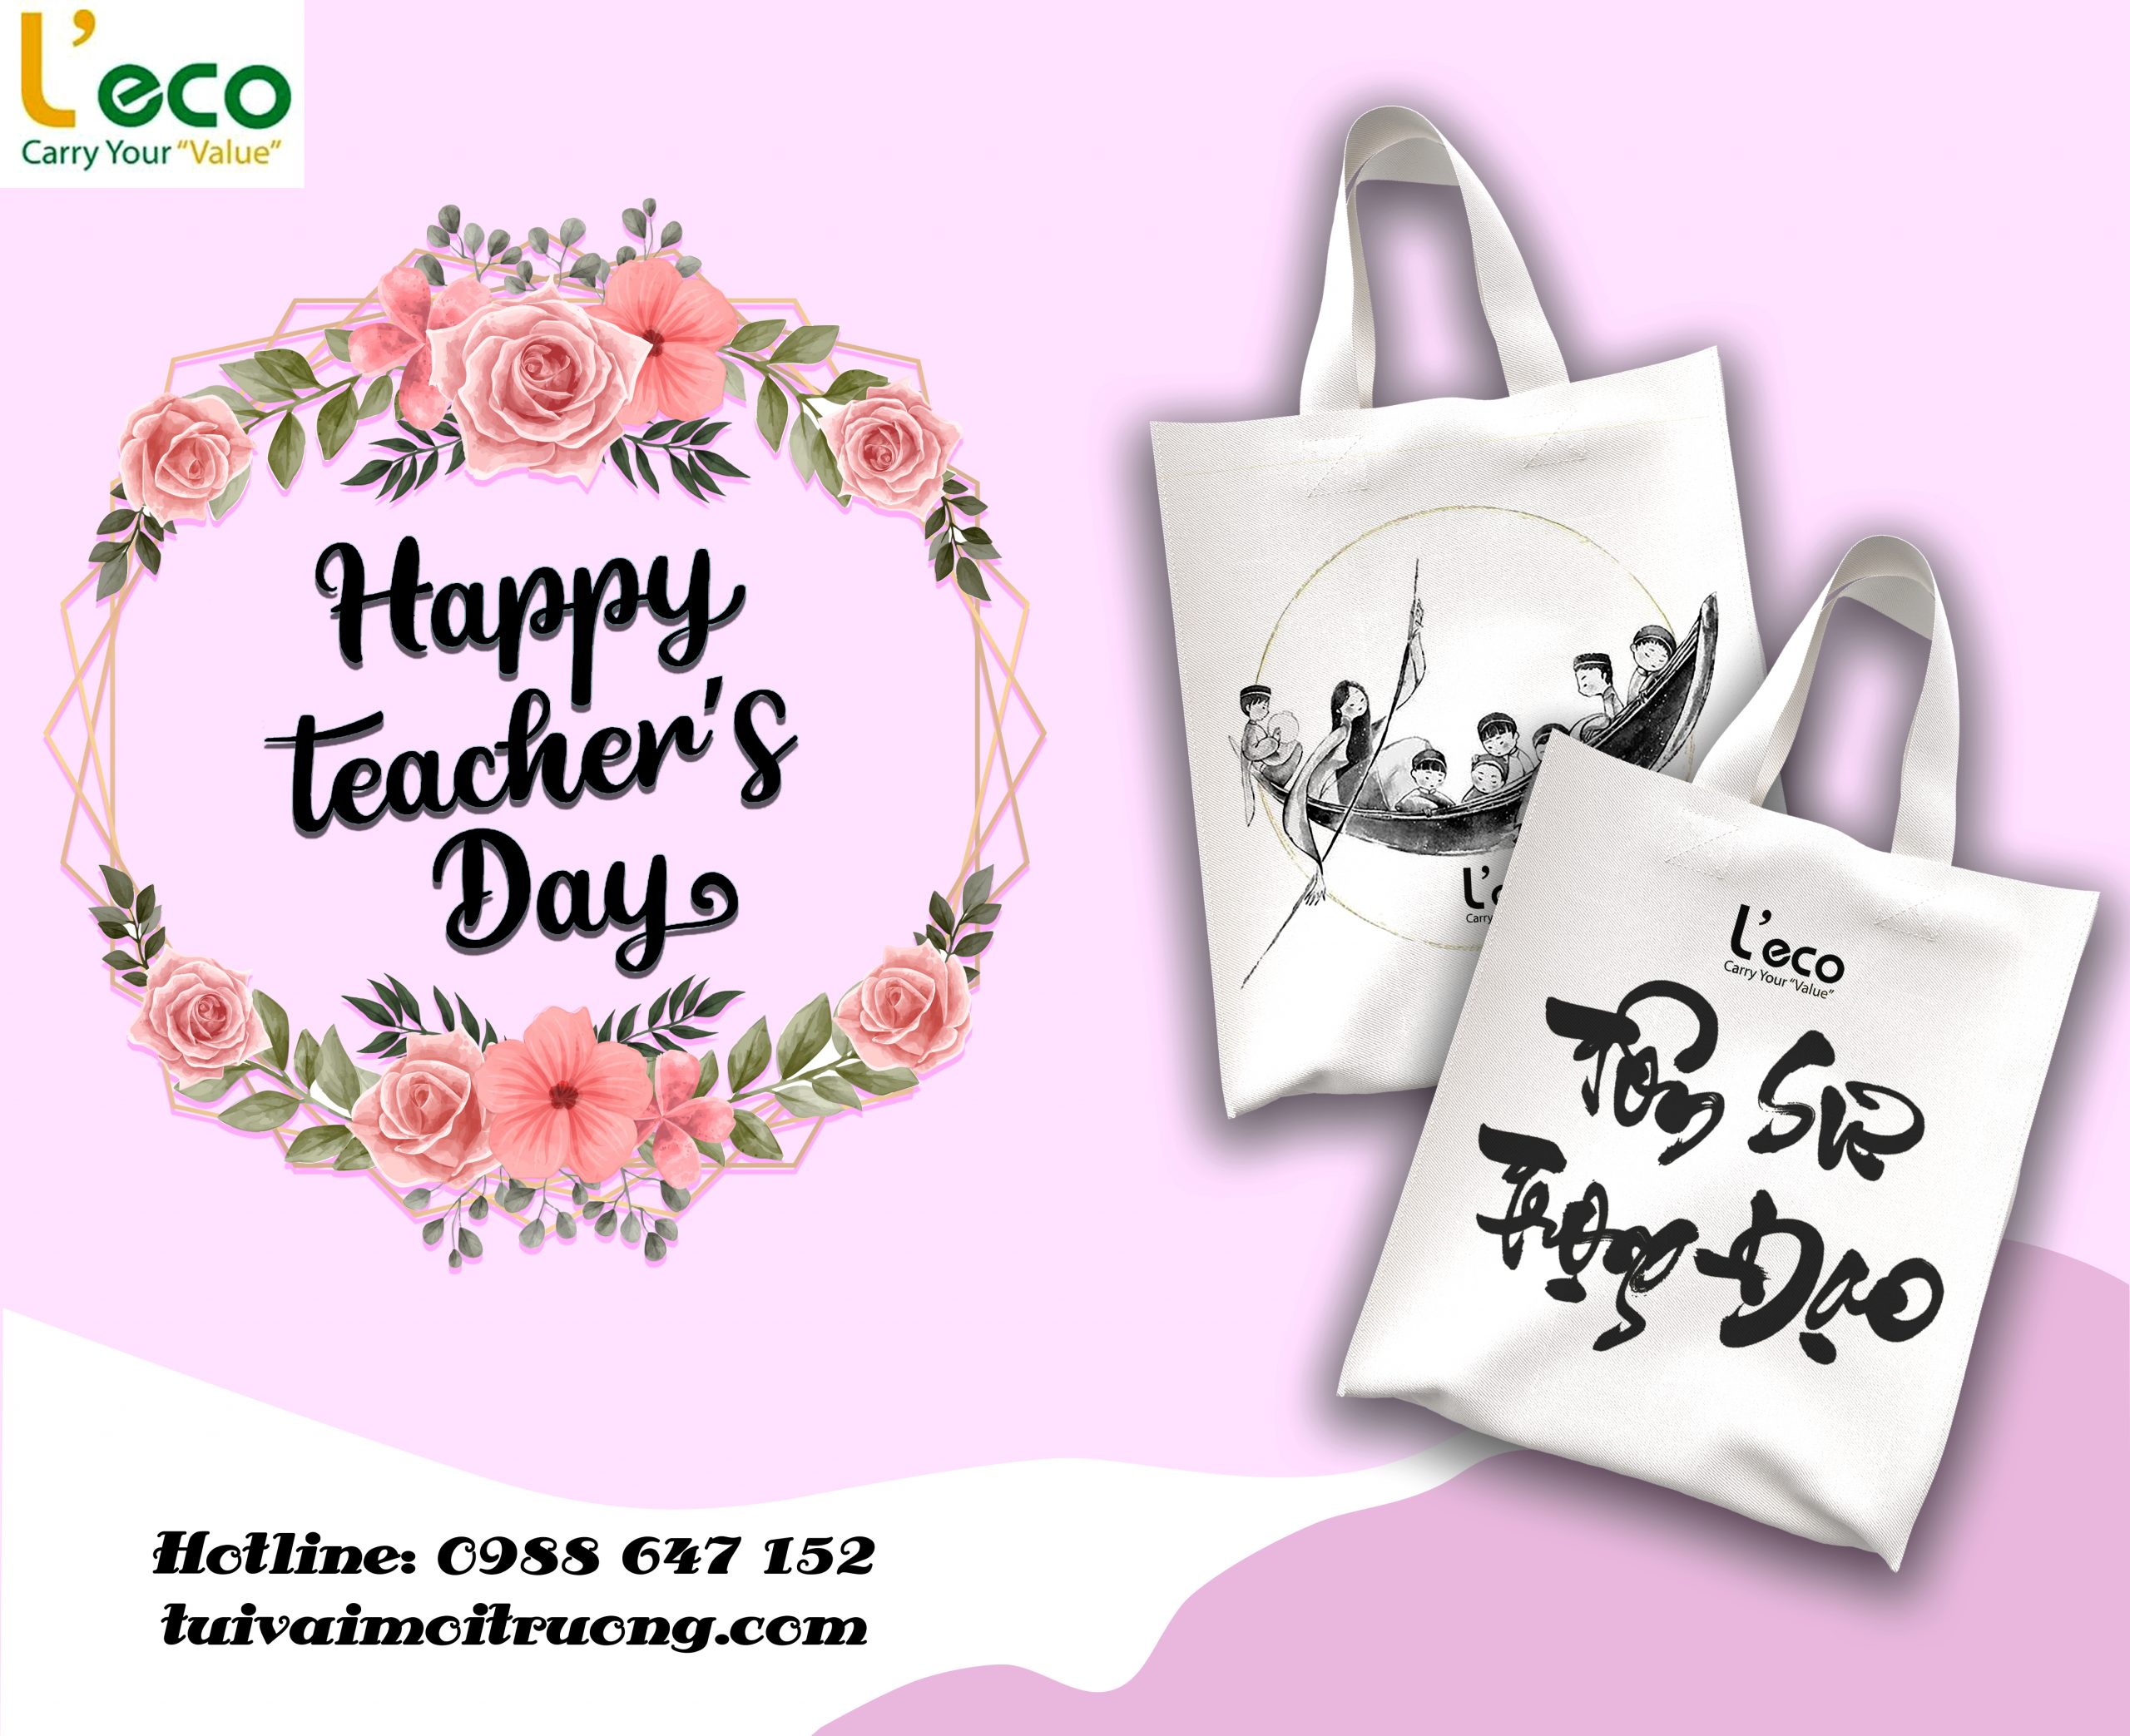 MEANINGFIL GIFT FROM TEACHER’S DAY CANVAS BAGS